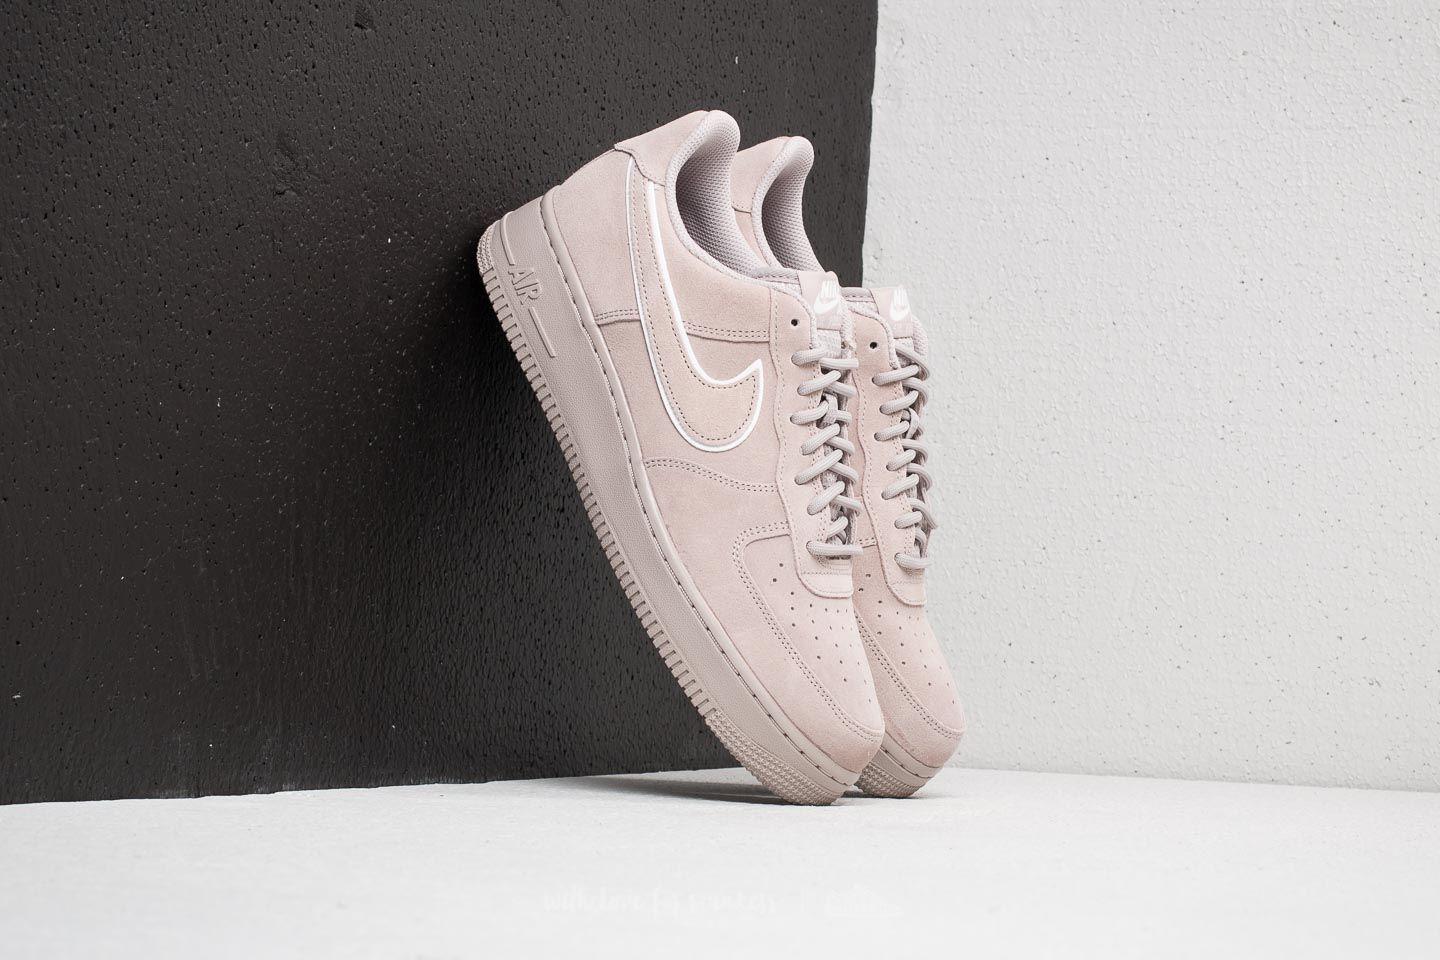 lade som om Rend Partina City Nike Air Force 1 '07 Lv8 Suede Moon Particle/ Moon Particle for Men - Lyst